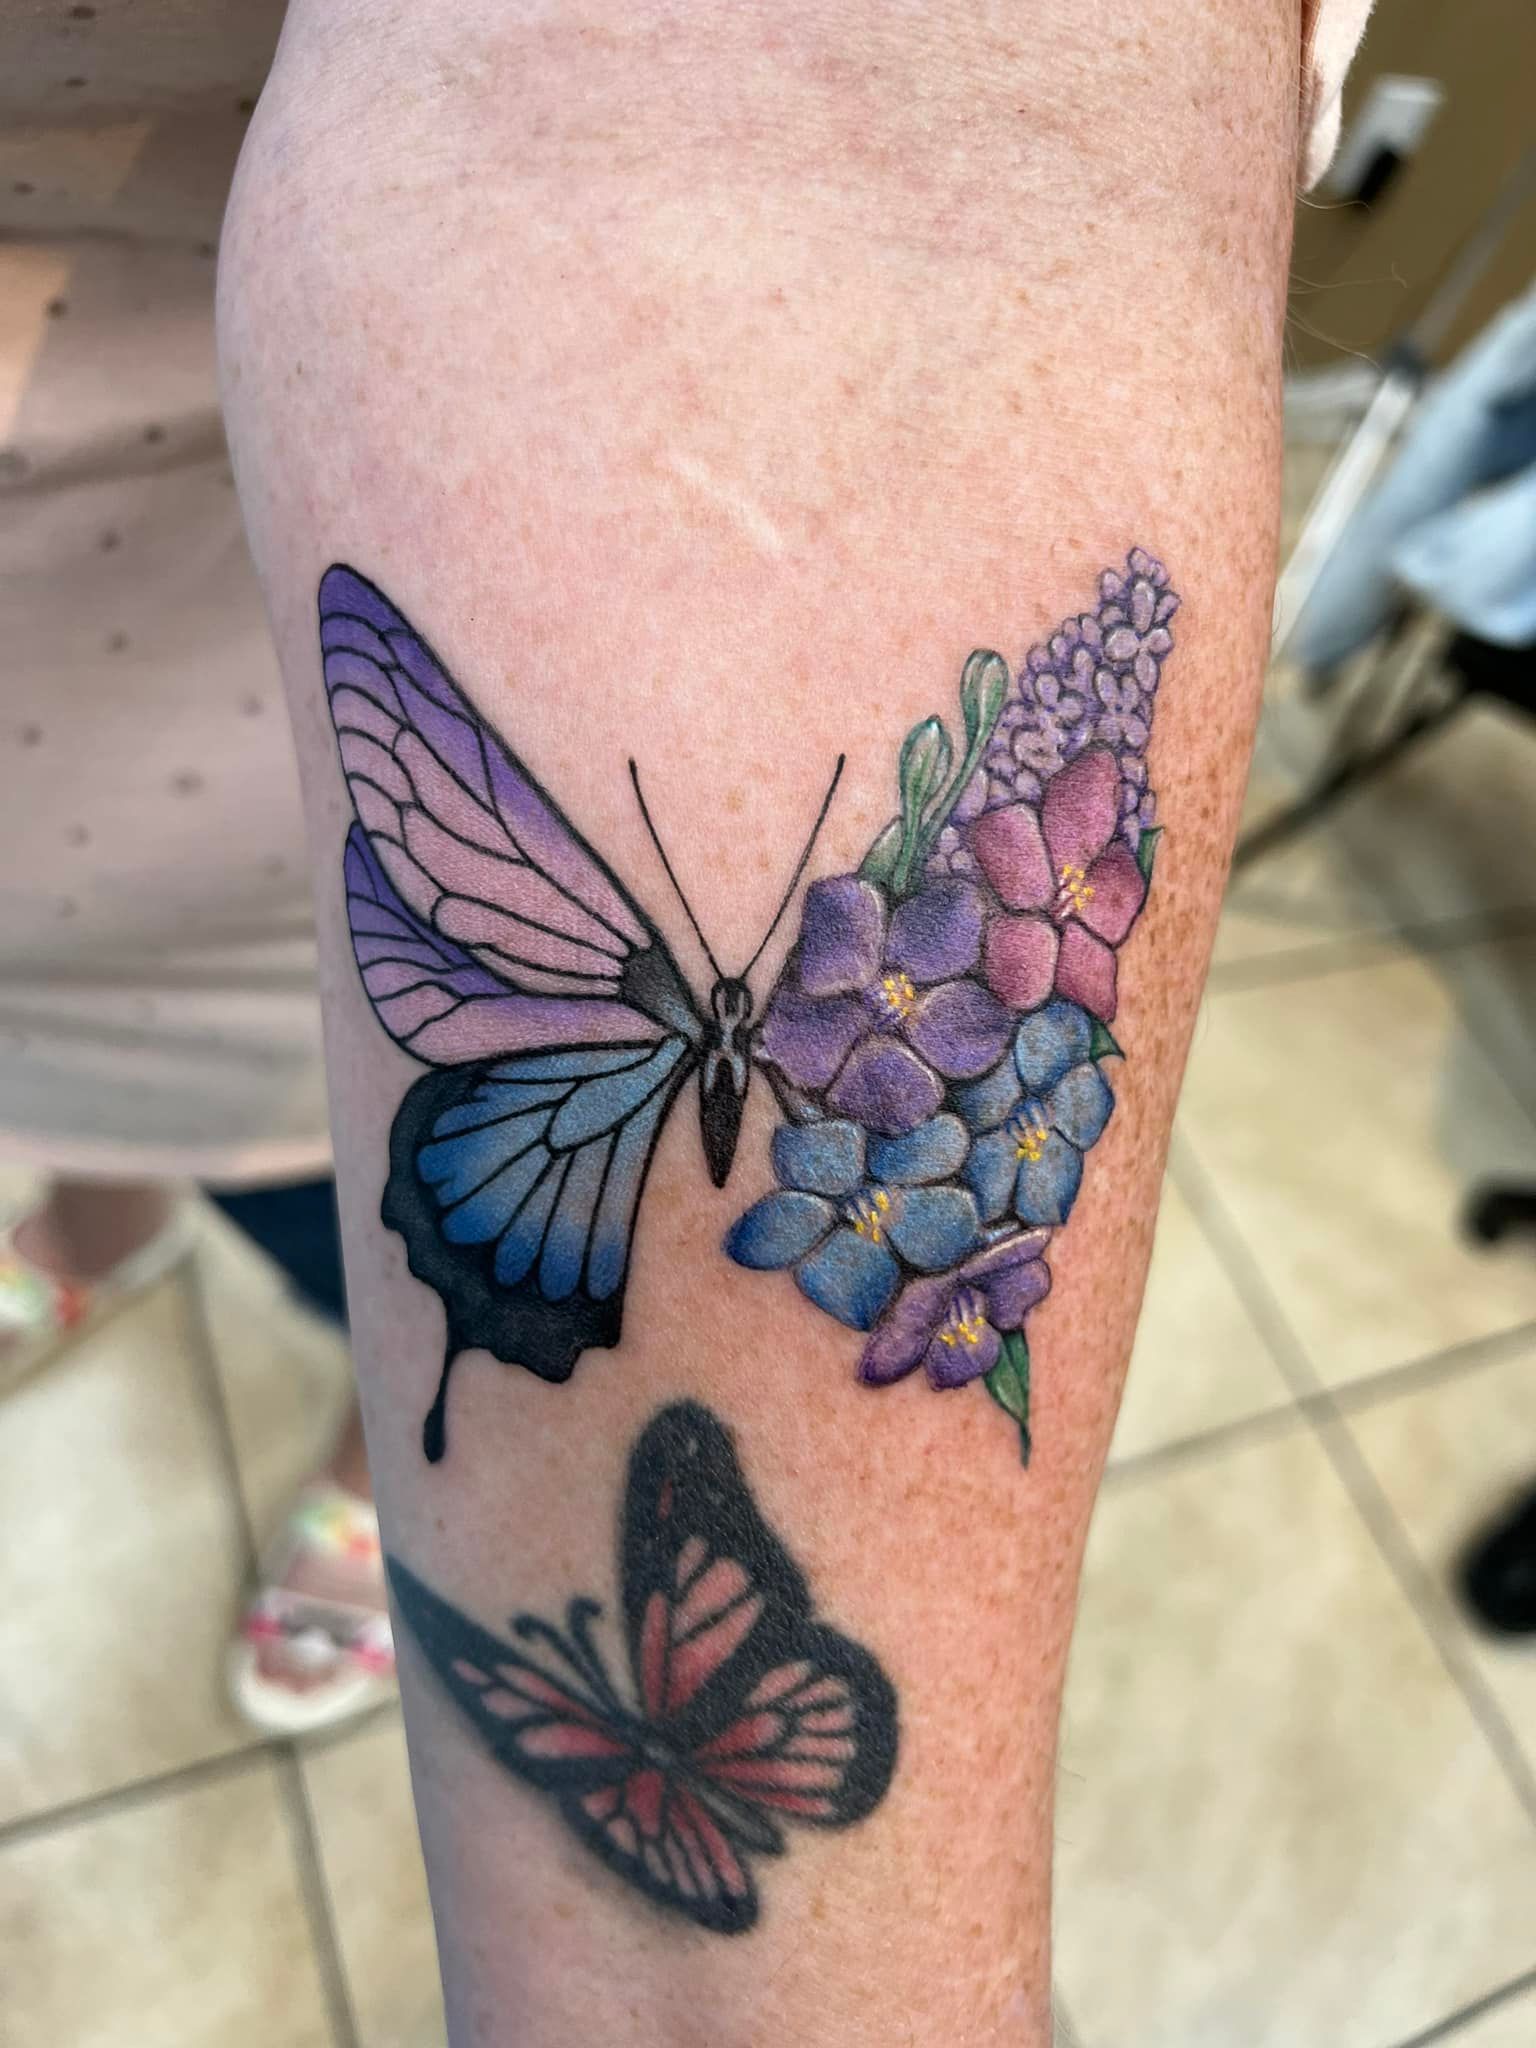 Colorful butterfly tattoo on forearm